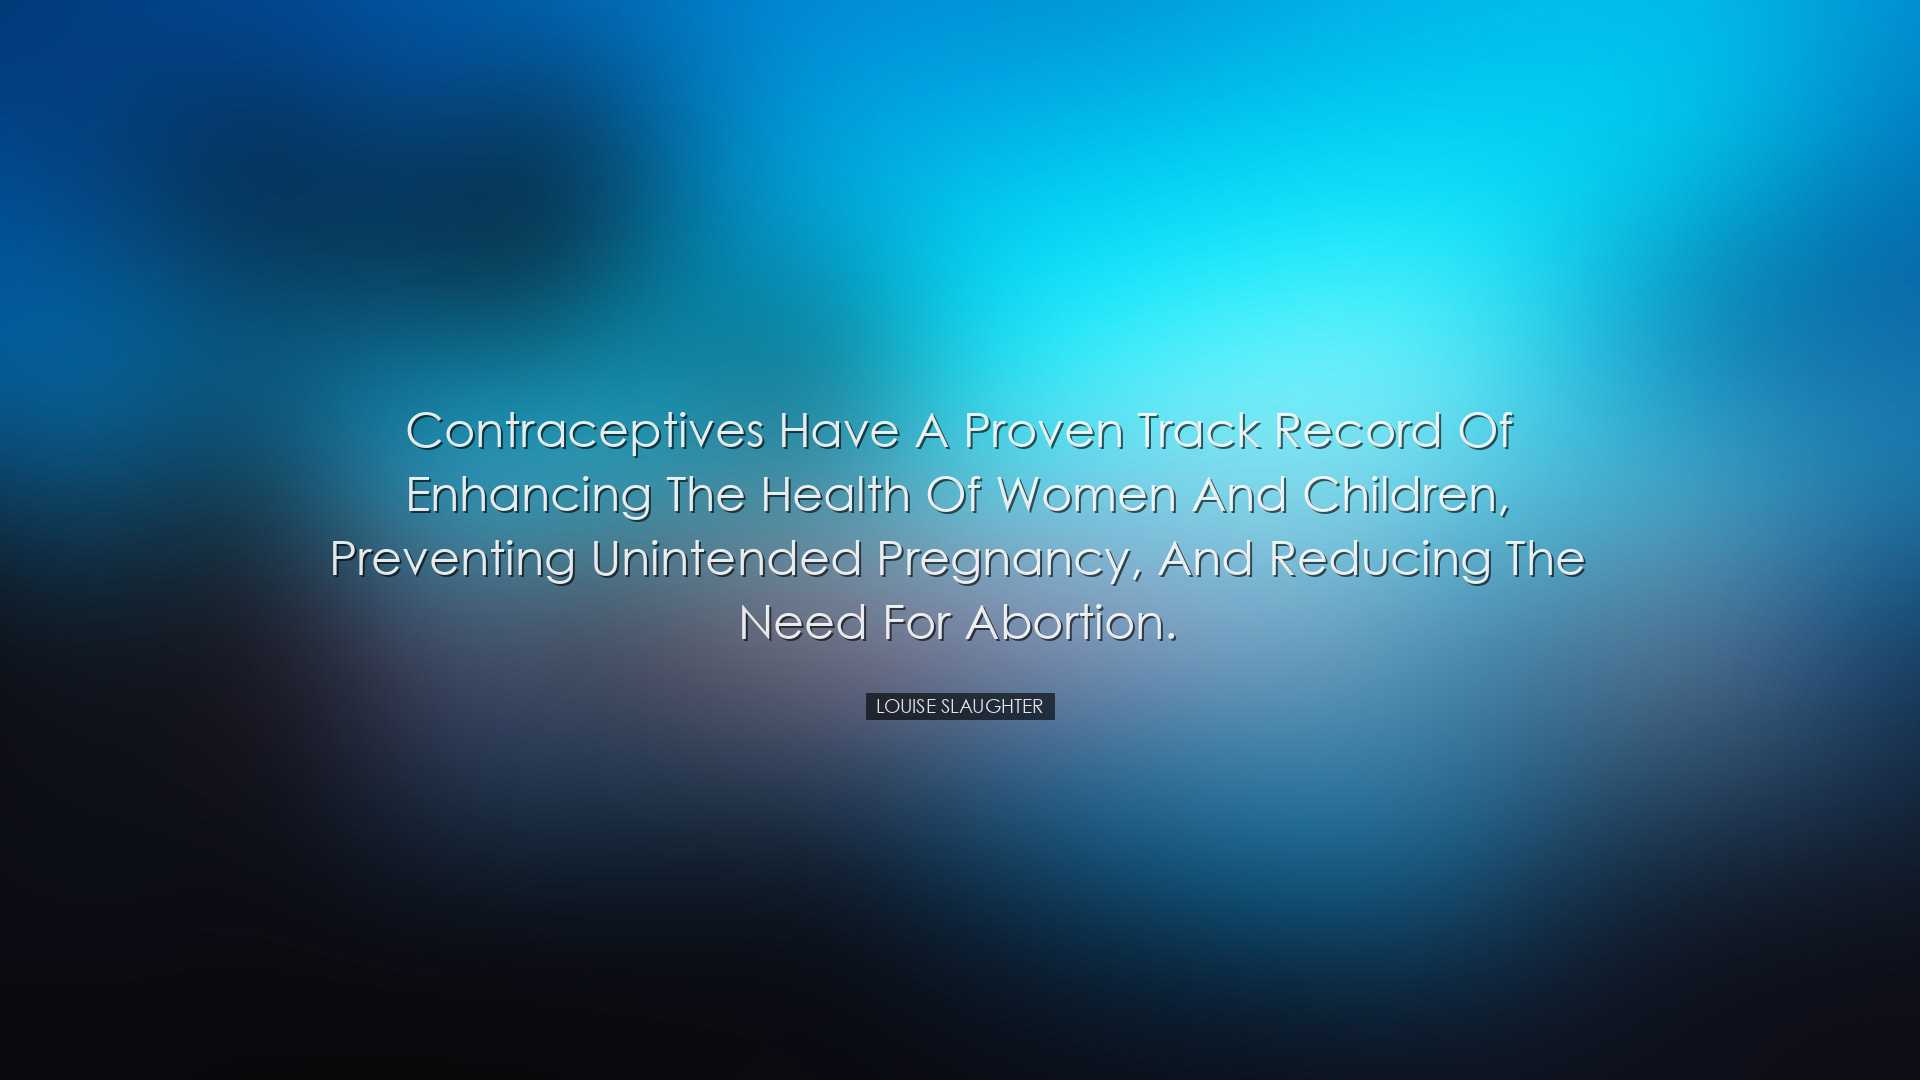 Contraceptives have a proven track record of enhancing the health